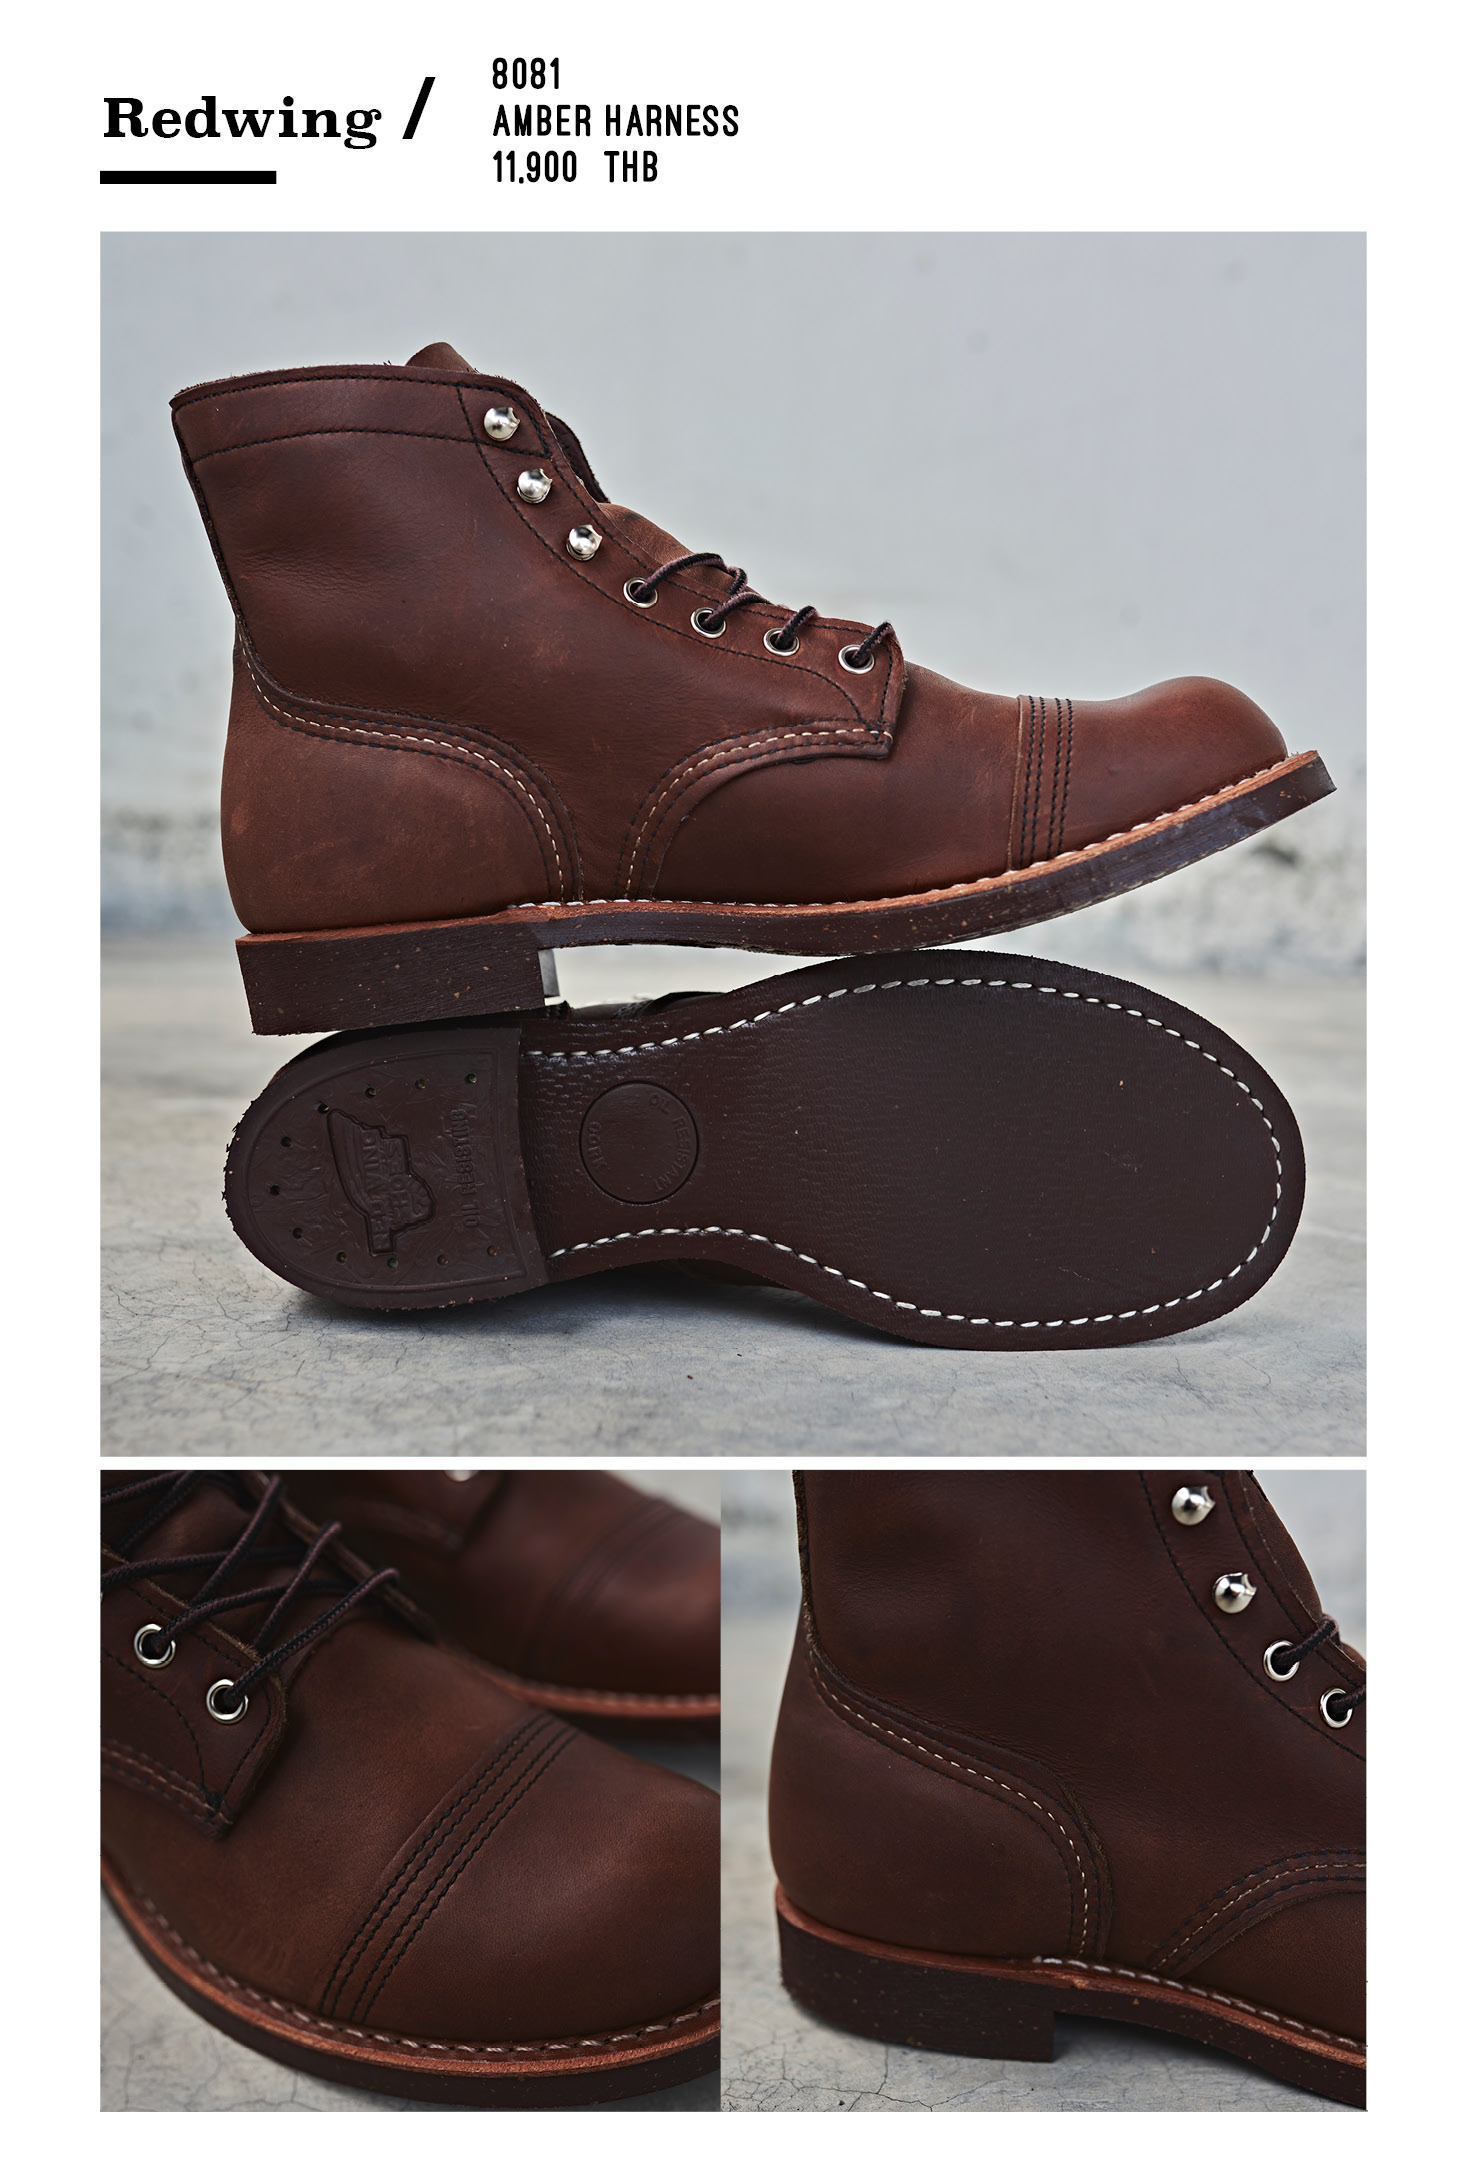 New Arrival: RED WING